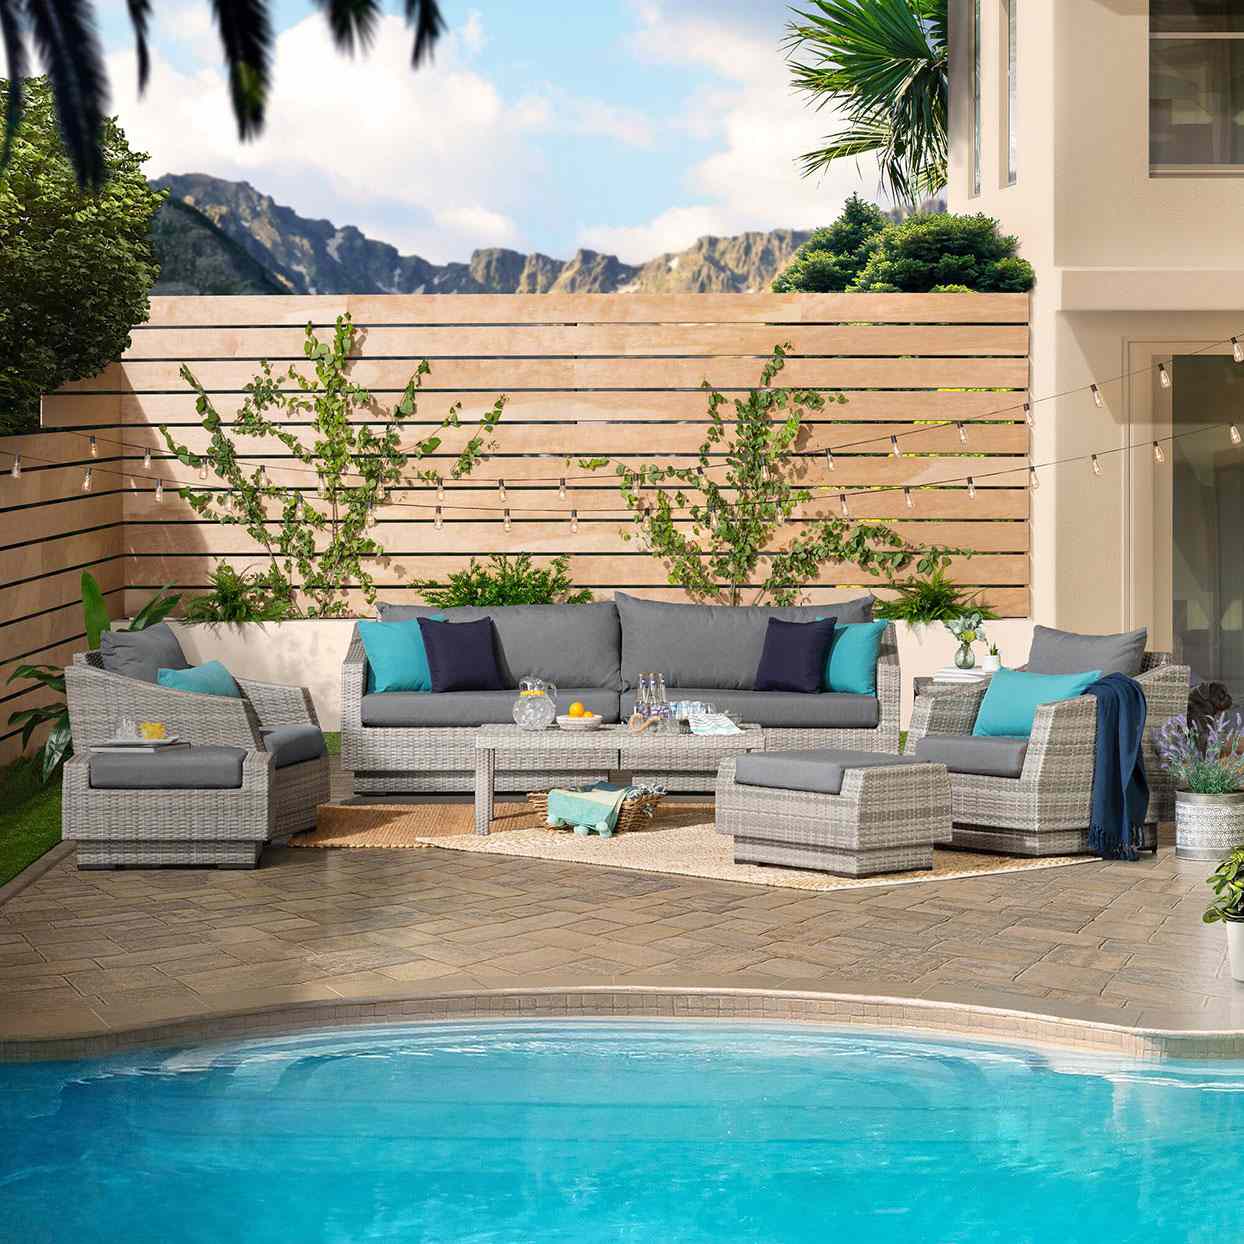 The Best Outdoor Patio Furniture in 2021 | Better Homes & Gardens